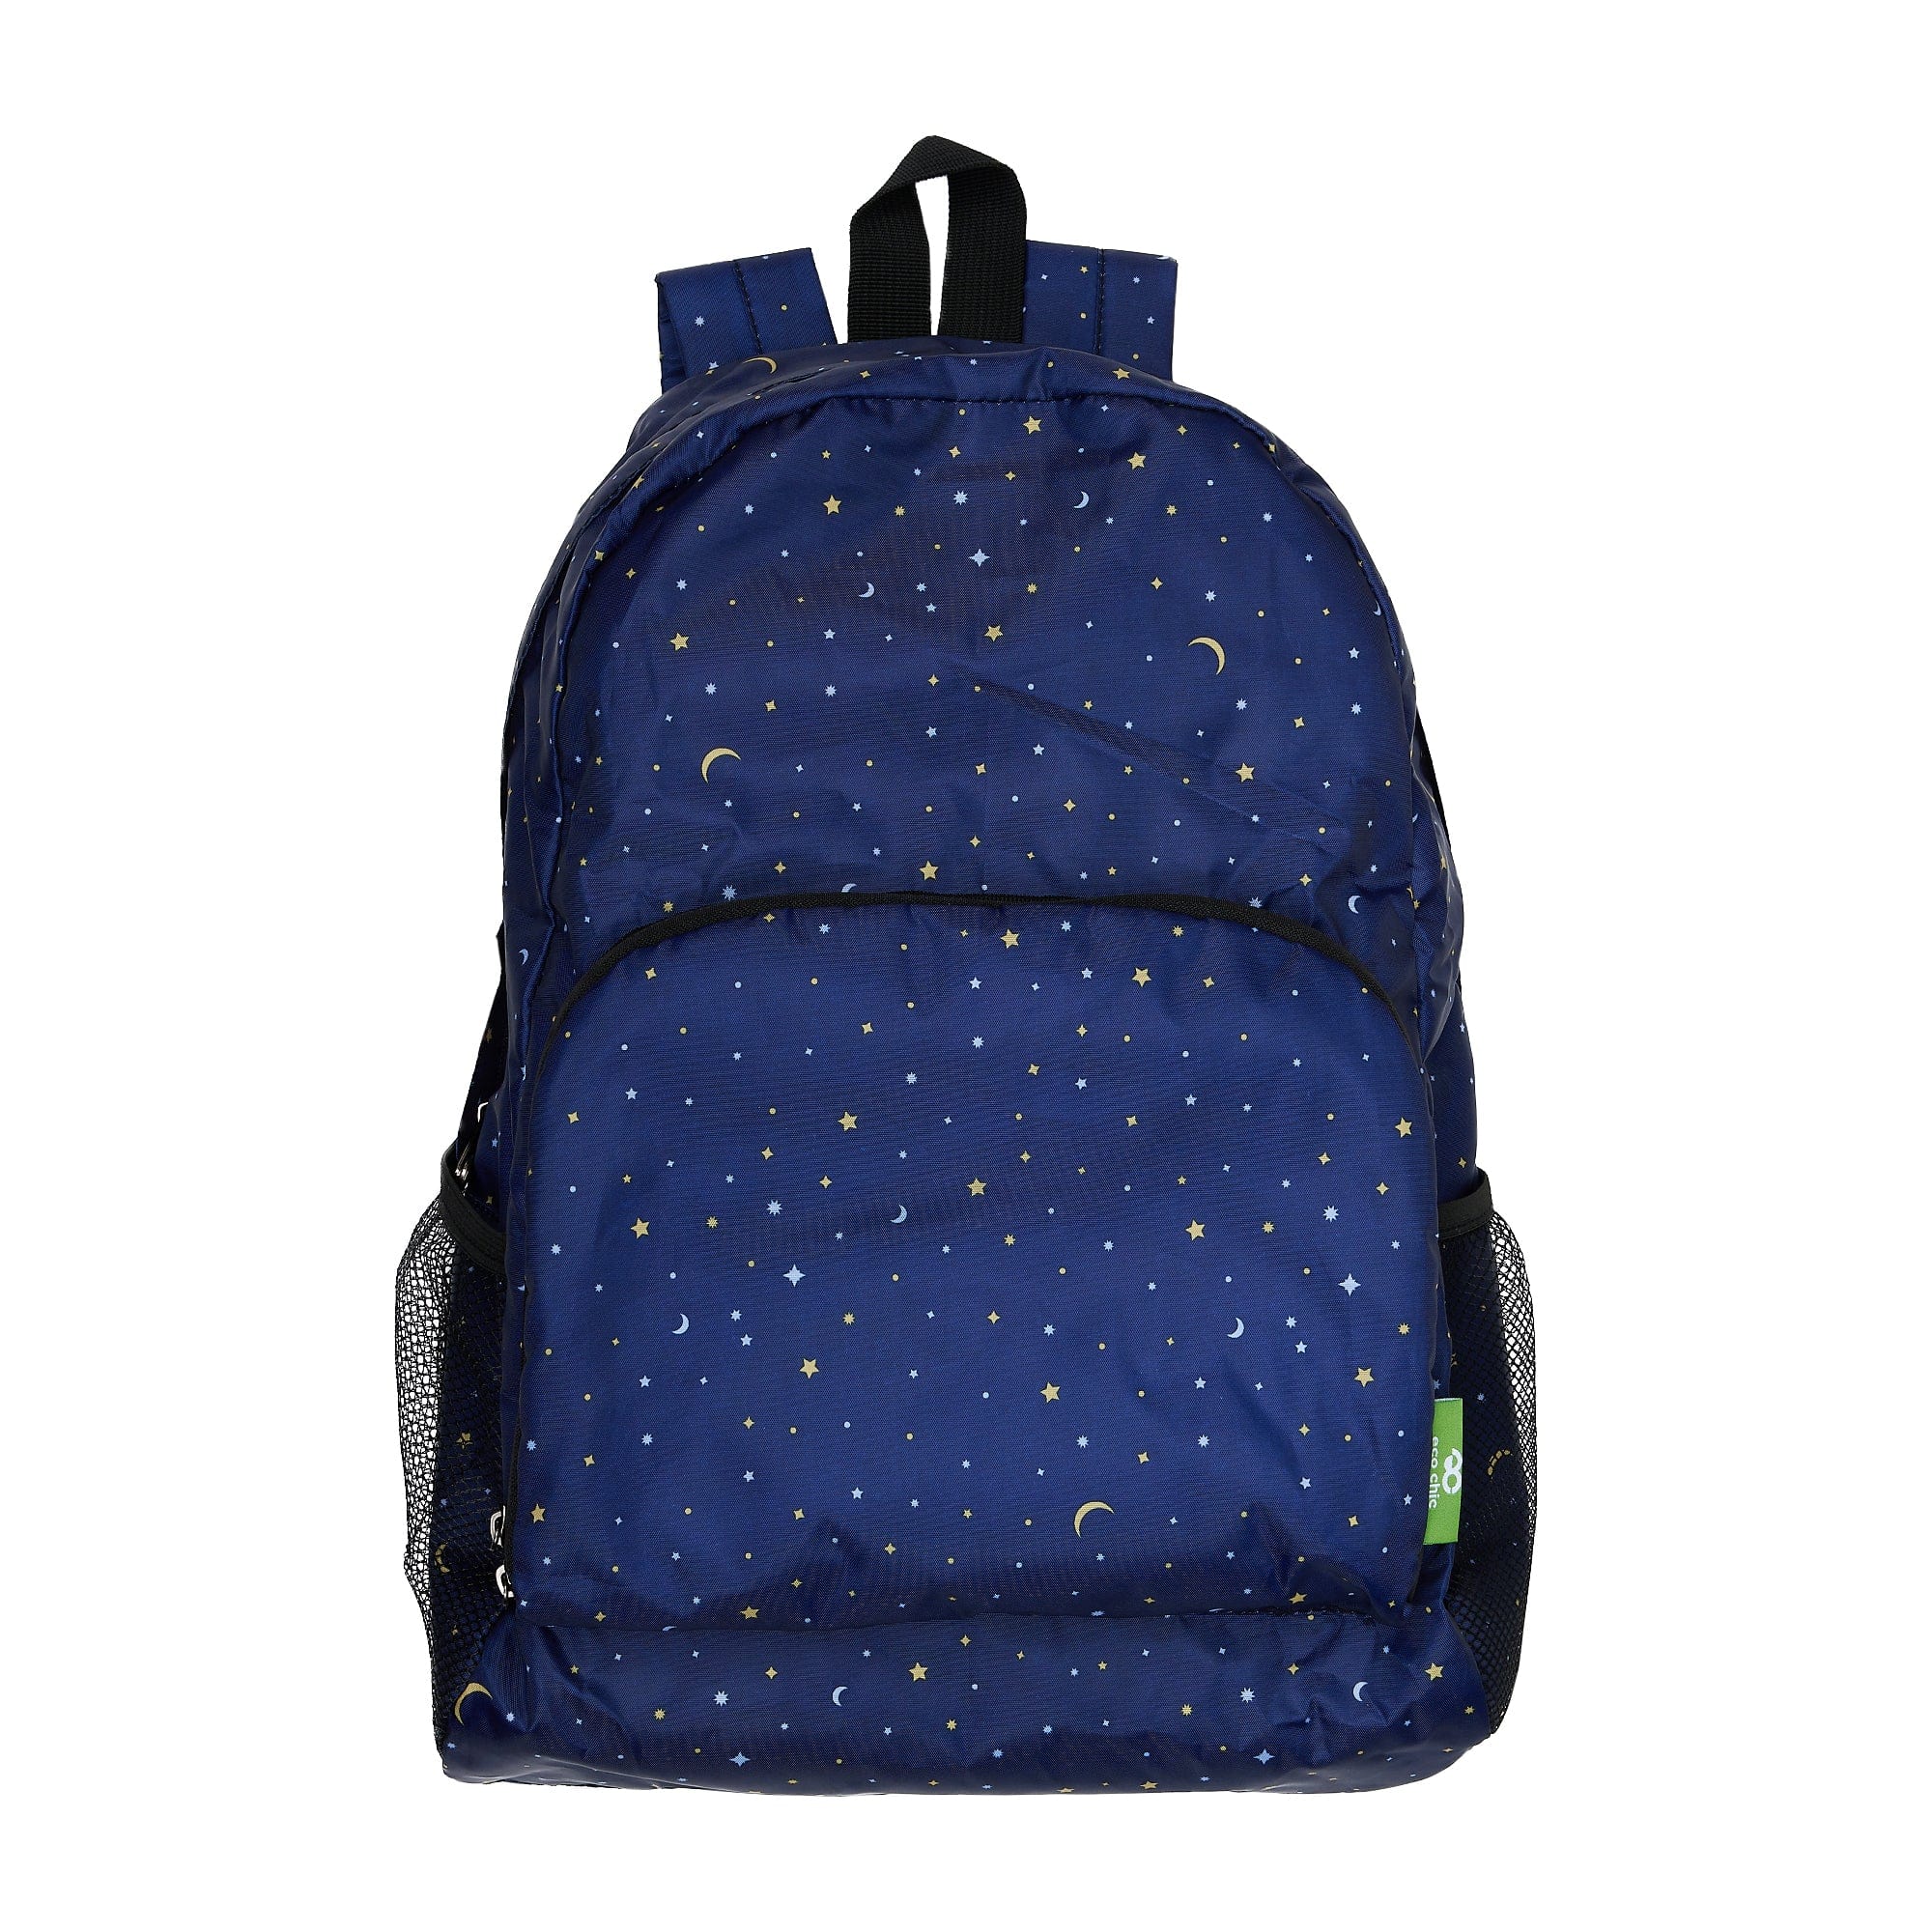 Eco Chic Navy Eco Chic Lightweight Foldable Backpack Stars and Moons